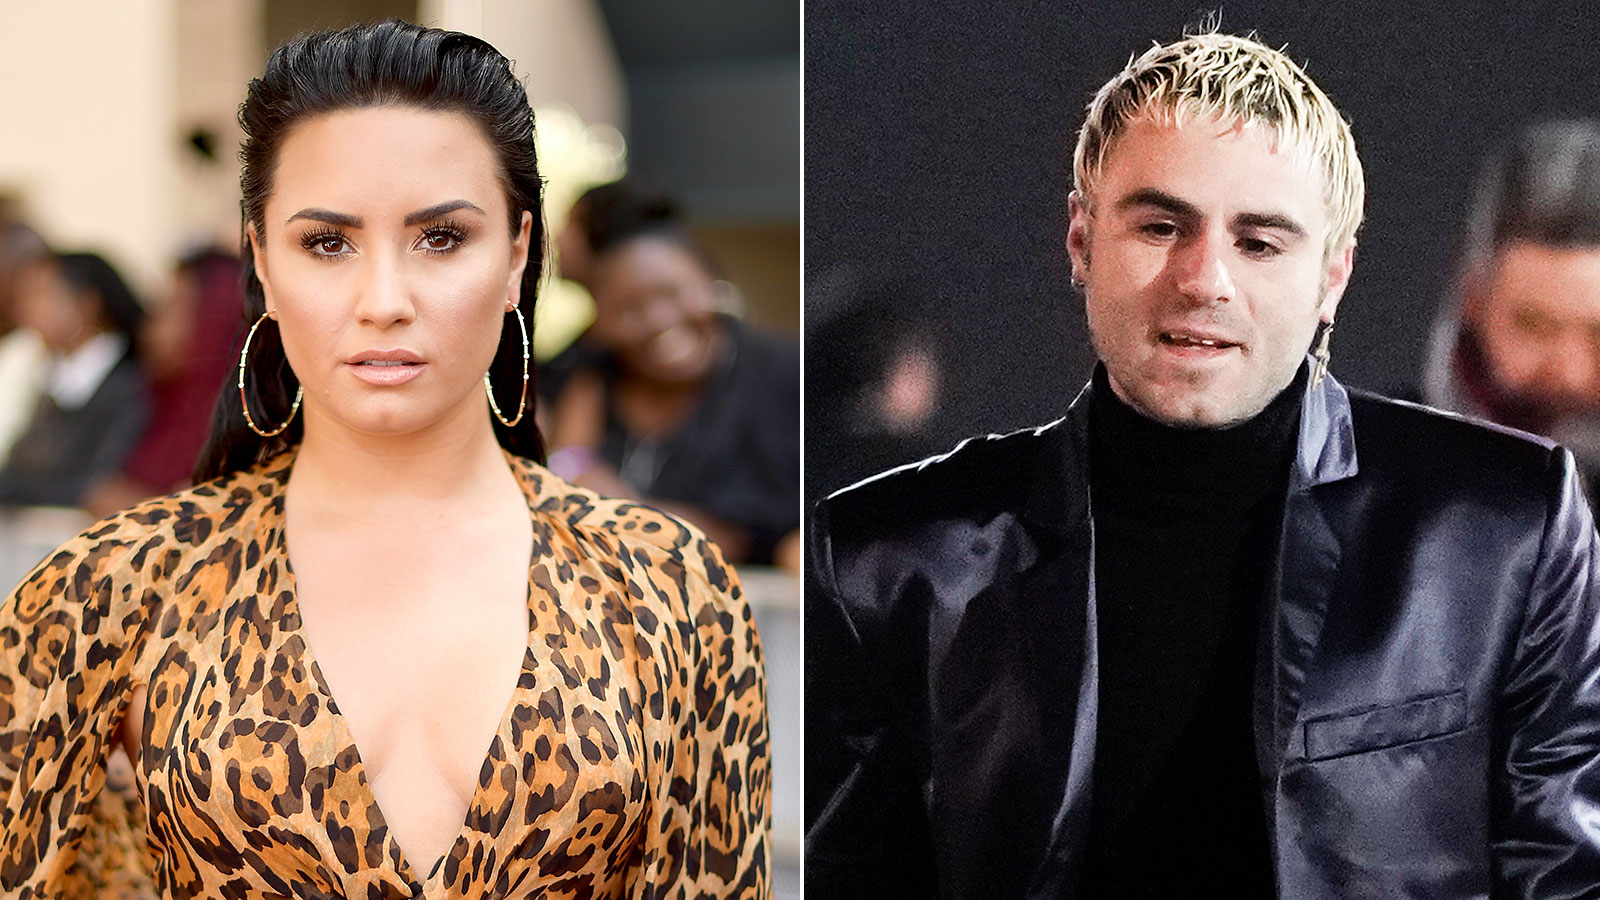 Demi and Levy Break Up After 4 Months of Dating